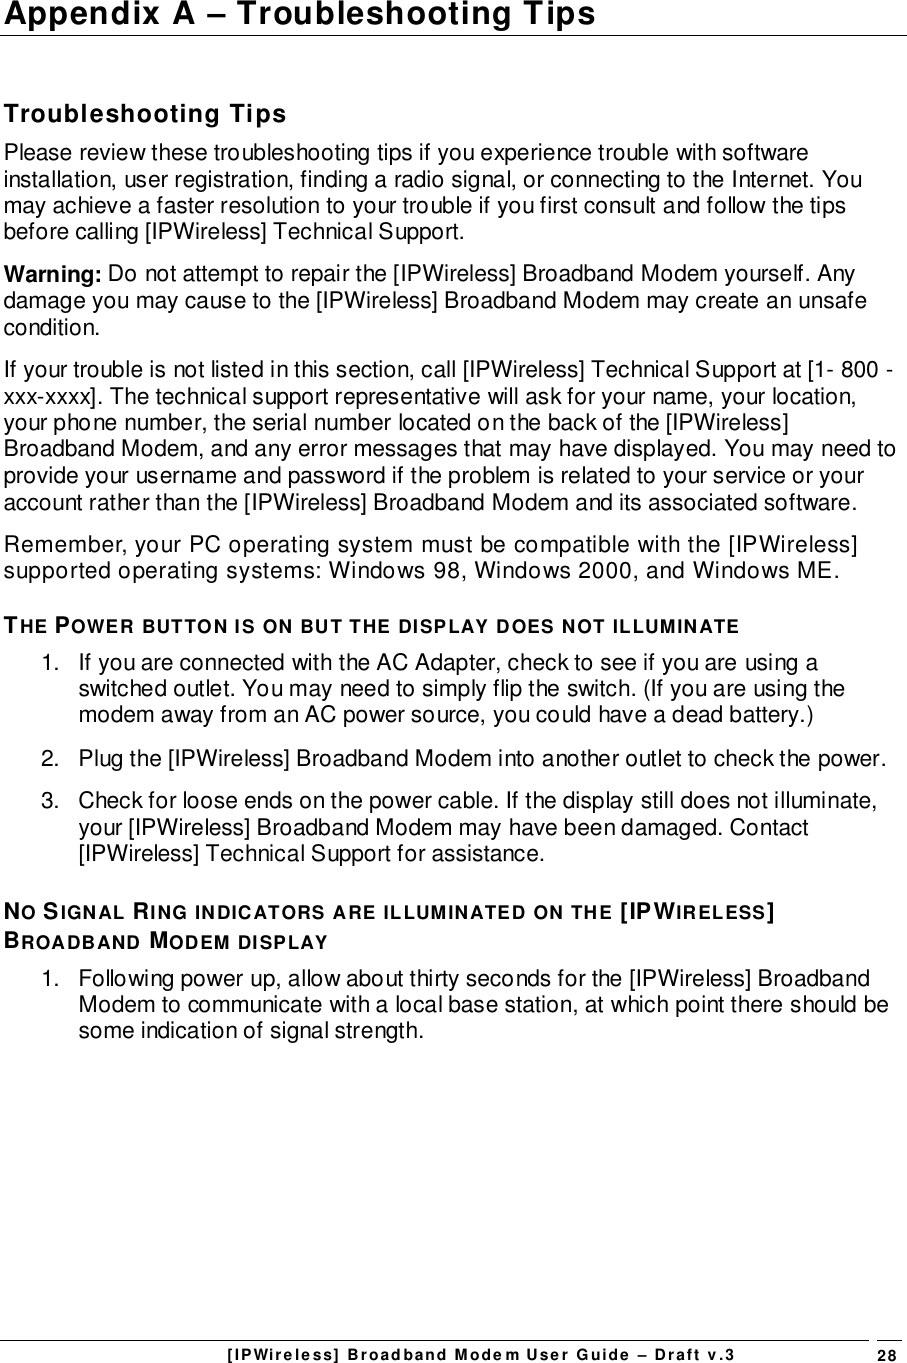 [IPWireless] Broadband Modem User Guide – Draft v.3 28Appendix A – Troubleshooting TipsTroubleshooting TipsPlease review these troubleshooting tips if you experience trouble with softwareinstallation, user registration, finding a radio signal, or connecting to the Internet. Youmay achieve a faster resolution to your trouble if you first consult and follow the tipsbefore calling [IPWireless] Technical Support.Warning: Do not attempt to repair the [IPWireless] Broadband Modem yourself. Anydamage you may cause to the [IPWireless] Broadband Modem may create an unsafecondition.If your trouble is not listed in this section, call [IPWireless] Technical Support at [1- 800 -xxx-xxxx]. The technical support representative will ask for your name, your location,your phone number, the serial number located on the back of the [IPWireless]Broadband Modem, and any error messages that may have displayed. You may need toprovide your username and password if the problem is related to your service or youraccount rather than the [IPWireless] Broadband Modem and its associated software.Remember, your PC operating system must be compatible with the [IPWireless]supported operating systems: Windows 98, Windows 2000, and Windows ME.THE POWER BUTTON IS ON BUT THE DISPLAY DOES NOT ILLUMINATE1.  If you are connected with the AC Adapter, check to see if you are using aswitched outlet. You may need to simply flip the switch. (If you are using themodem away from an AC power source, you could have a dead battery.)2.  Plug the [IPWireless] Broadband Modem into another outlet to check the power.3.  Check for loose ends on the power cable. If the display still does not illuminate,your [IPWireless] Broadband Modem may have been damaged. Contact[IPWireless] Technical Support for assistance.NO SIGNAL RING INDICATORS ARE ILLUMINATED ON THE [IPWIRELESS]BROADBAND MODEM DISPLAY1.  Following power up, allow about thirty seconds for the [IPWireless] BroadbandModem to communicate with a local base station, at which point there should besome indication of signal strength.